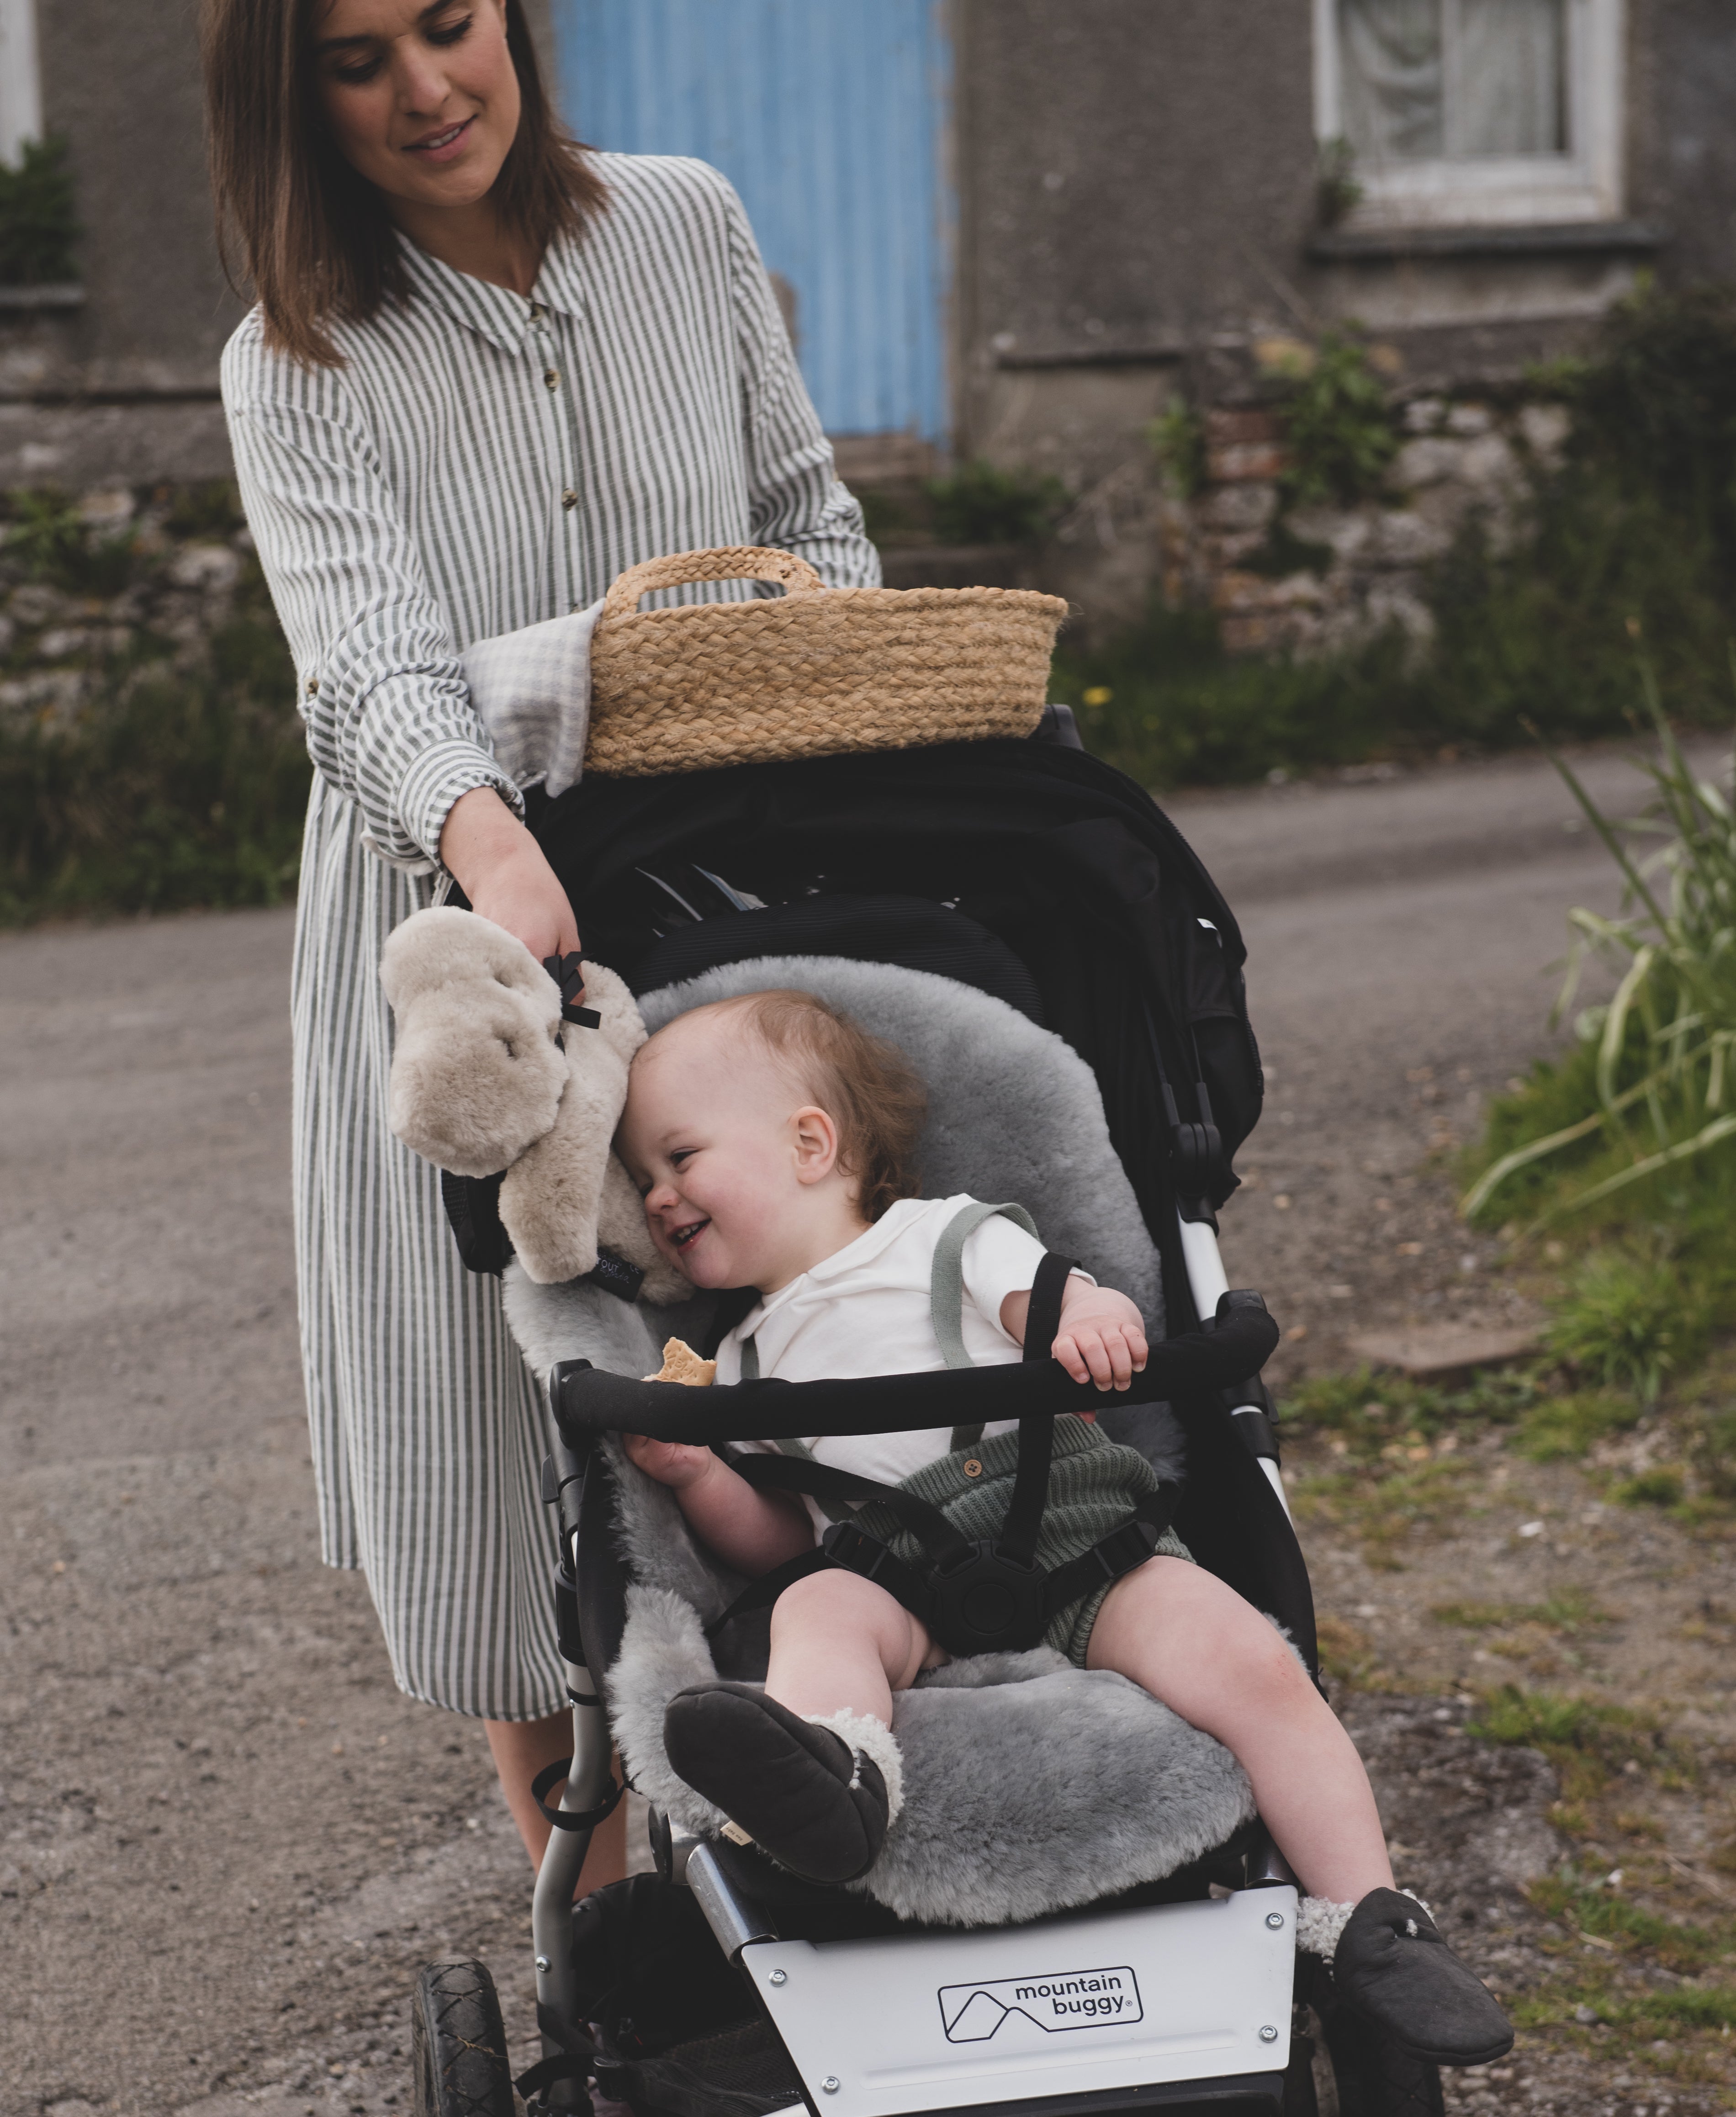 What do parents think about Sheepskin pram liners?